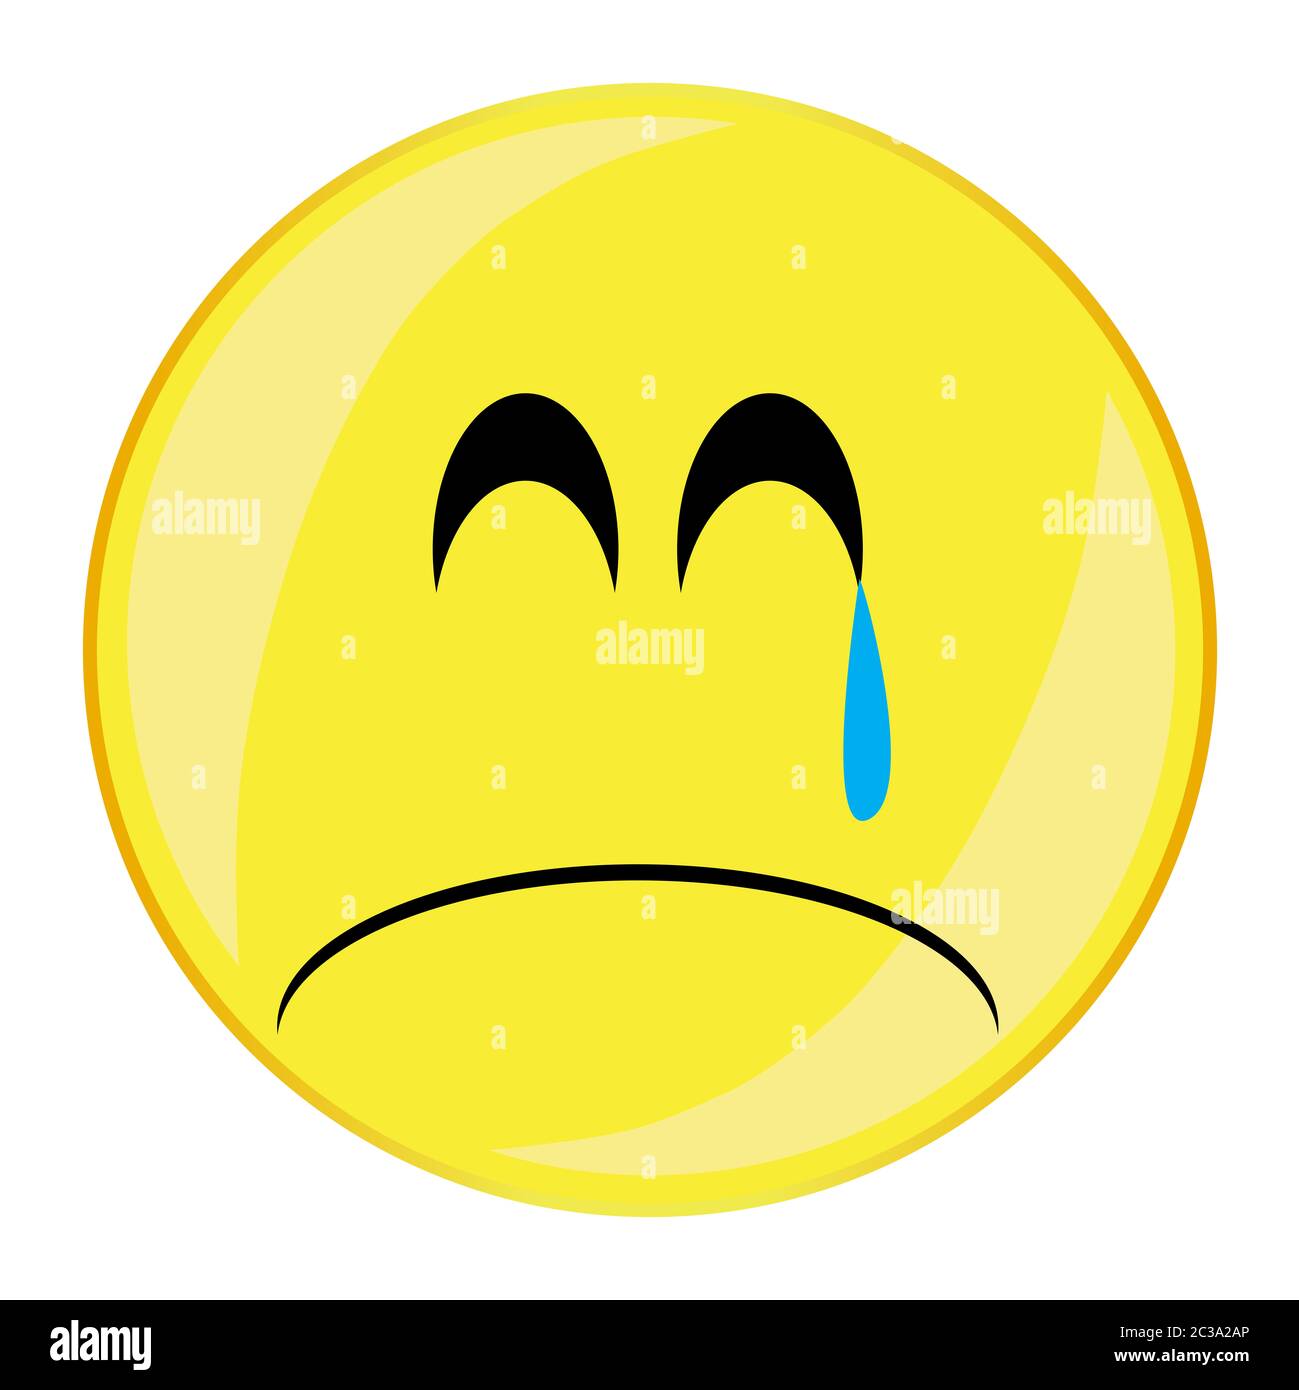 A unhappy smile face button isolated on a white background Stock Photo